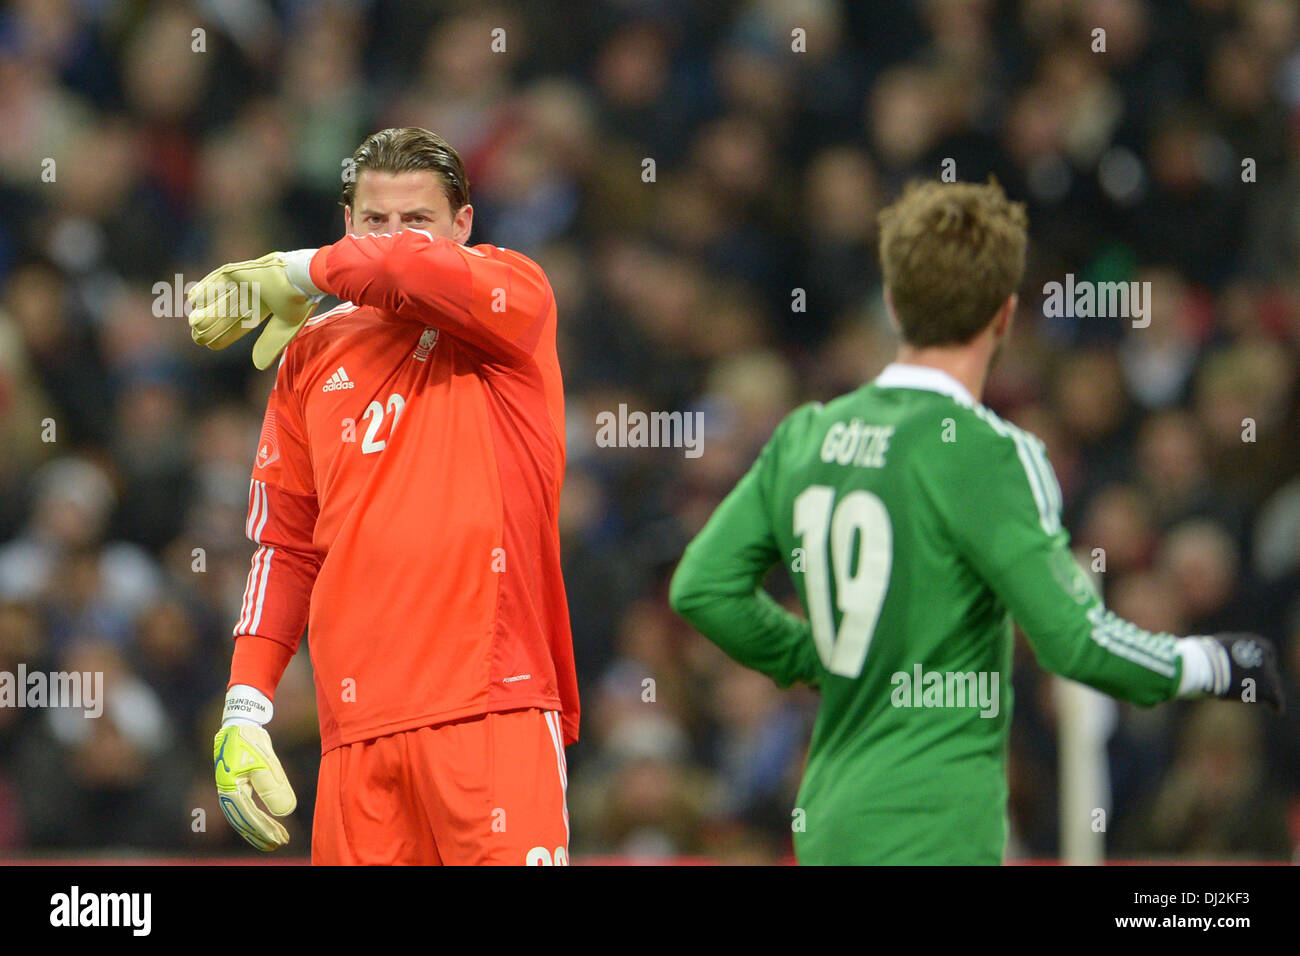 London, UK. 19th Nov, 2013. Germany's goalkeeper Roman Weidenfeller gestures during the friendly soccer match between England and Germany at Wembley Stadium in London, England, 19 November 2013. Photo: Andreas Gebert/dpa/Alamy Live News Stock Photo